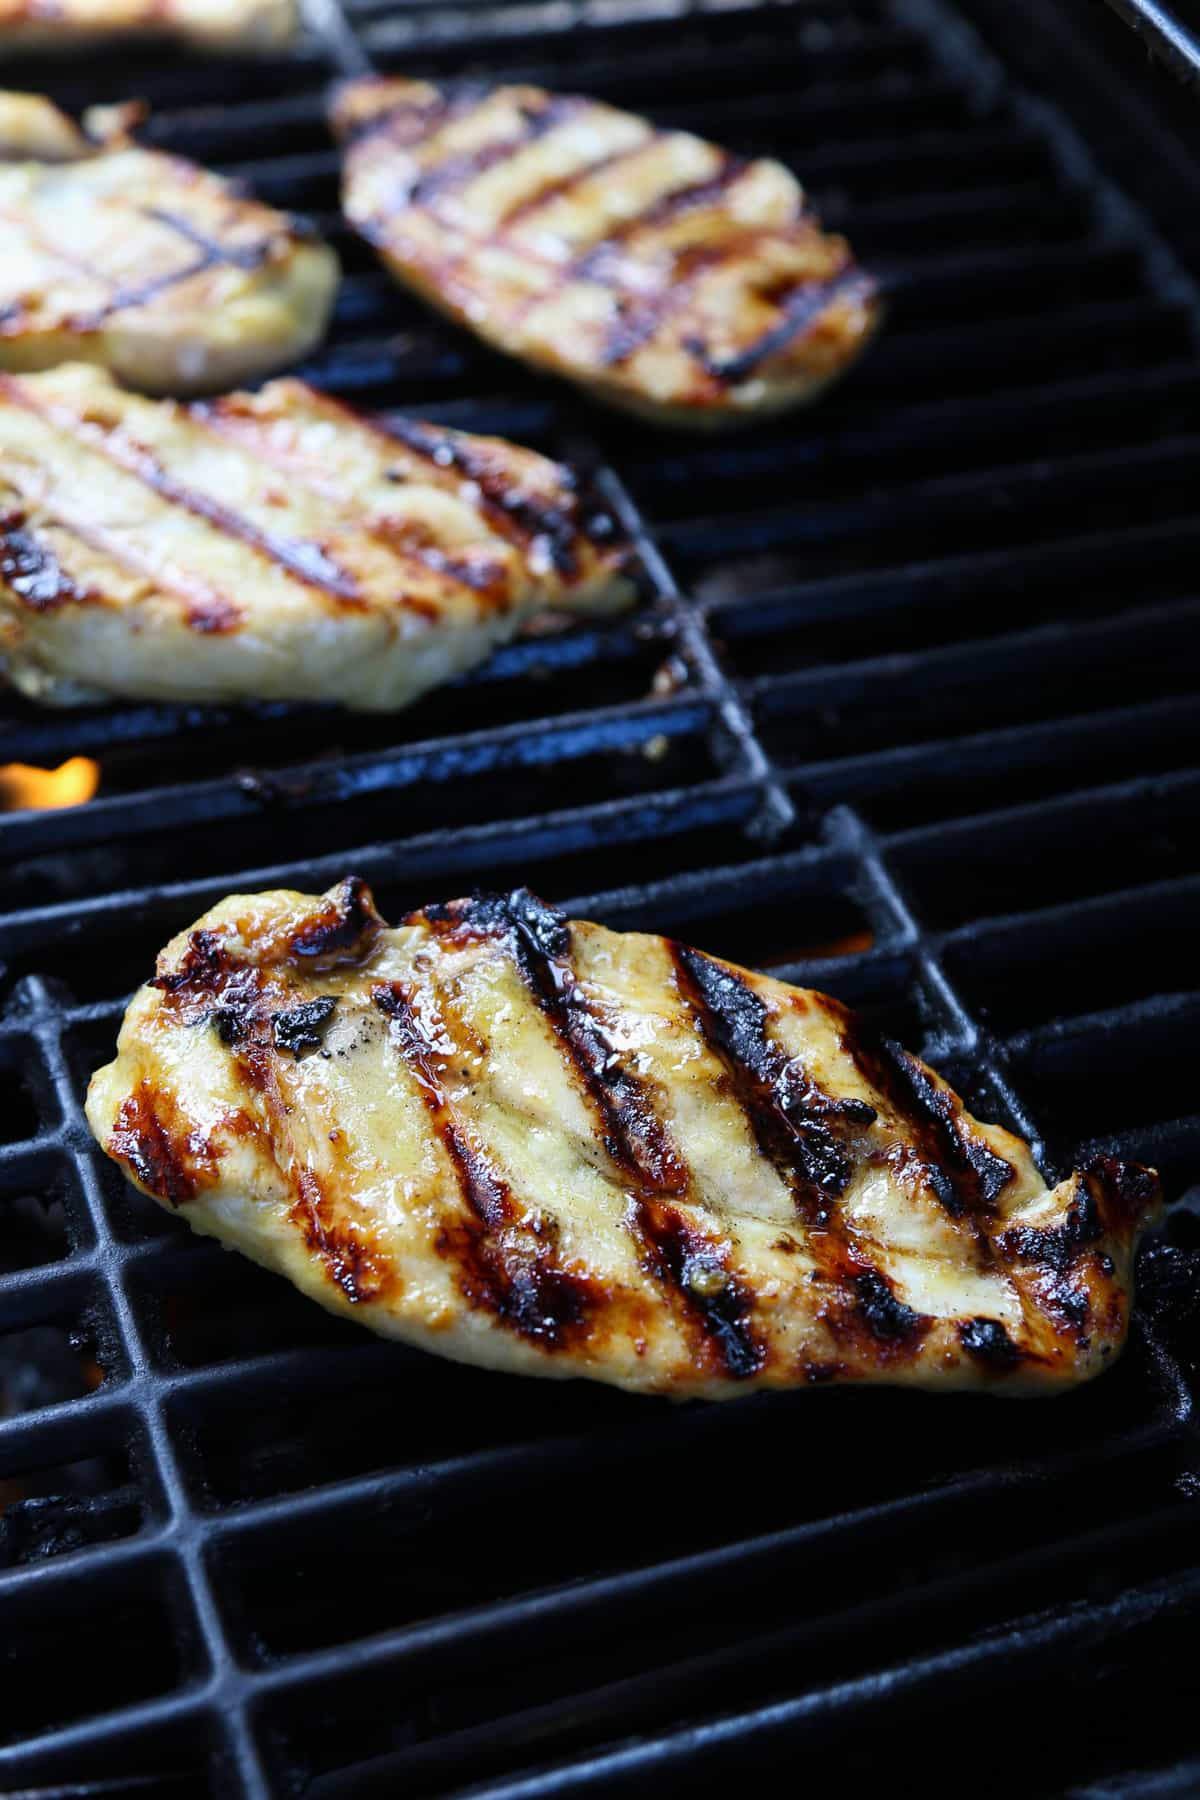 Marinated honey mustard chicken breasts on on the grill.